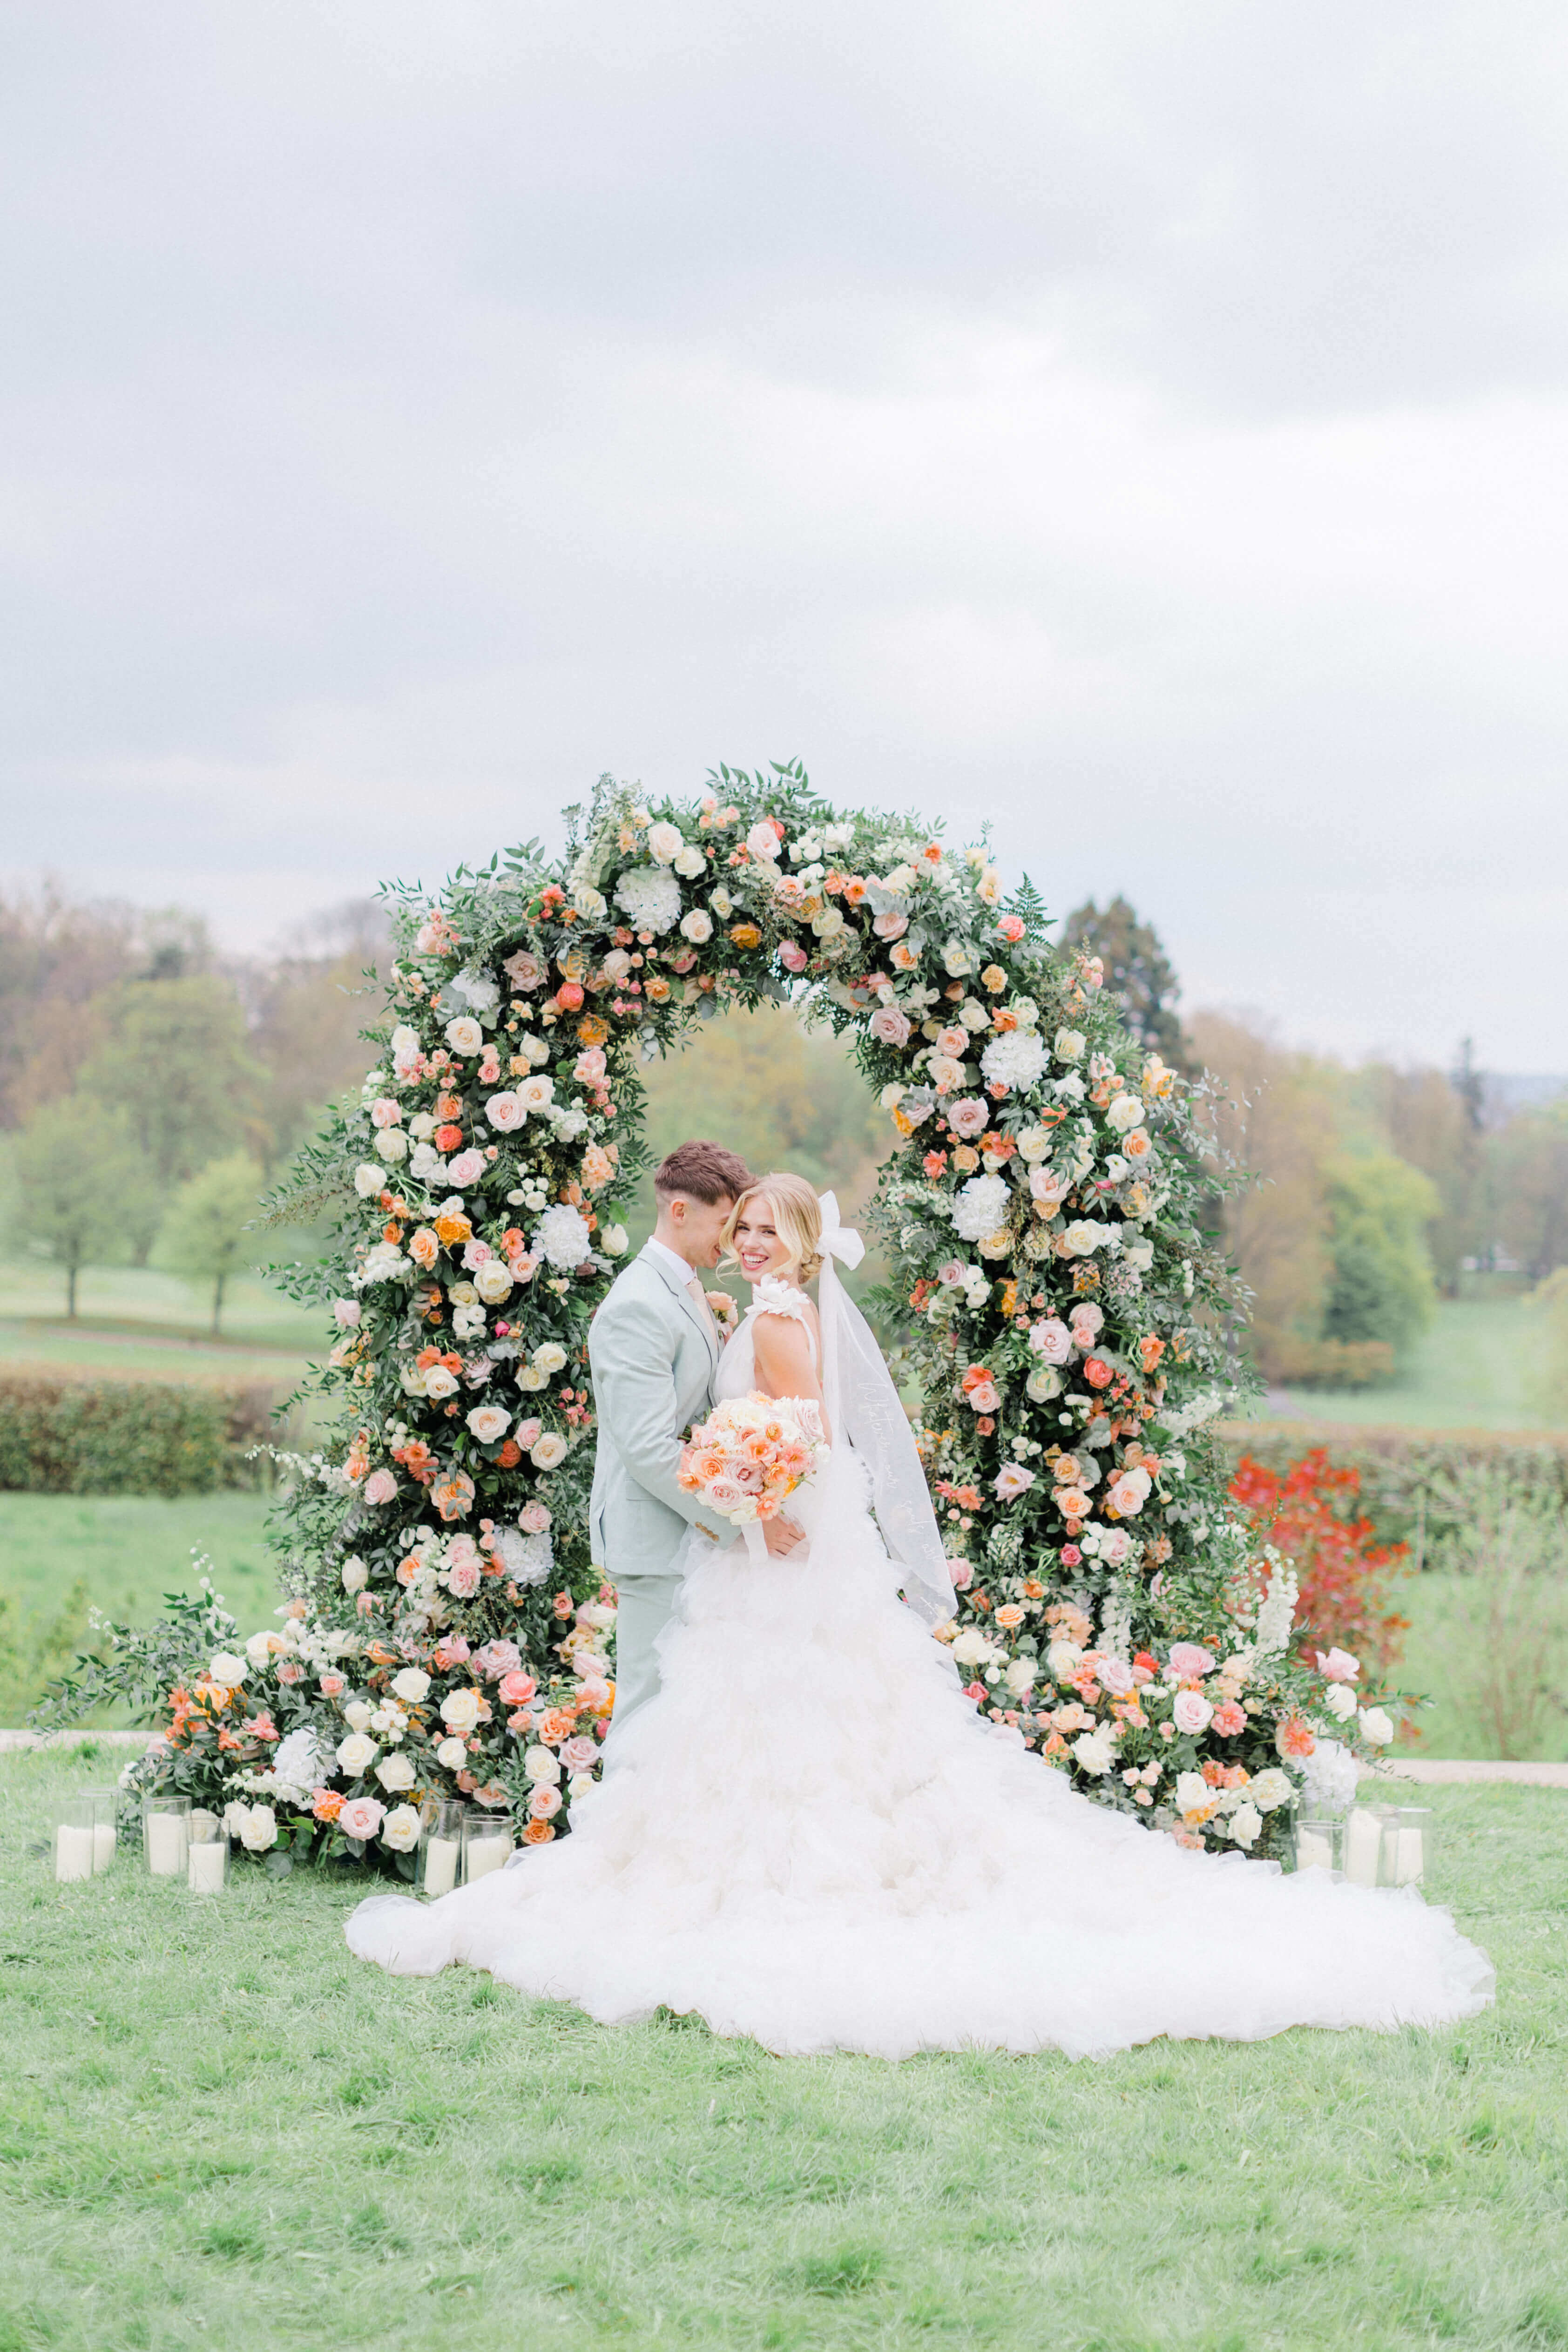 bride and groom standing in front Paris Wedding Chateau garden wedding ceremony set up with Pastel Floral arch on a lawn in front of Chateau Bouffemont